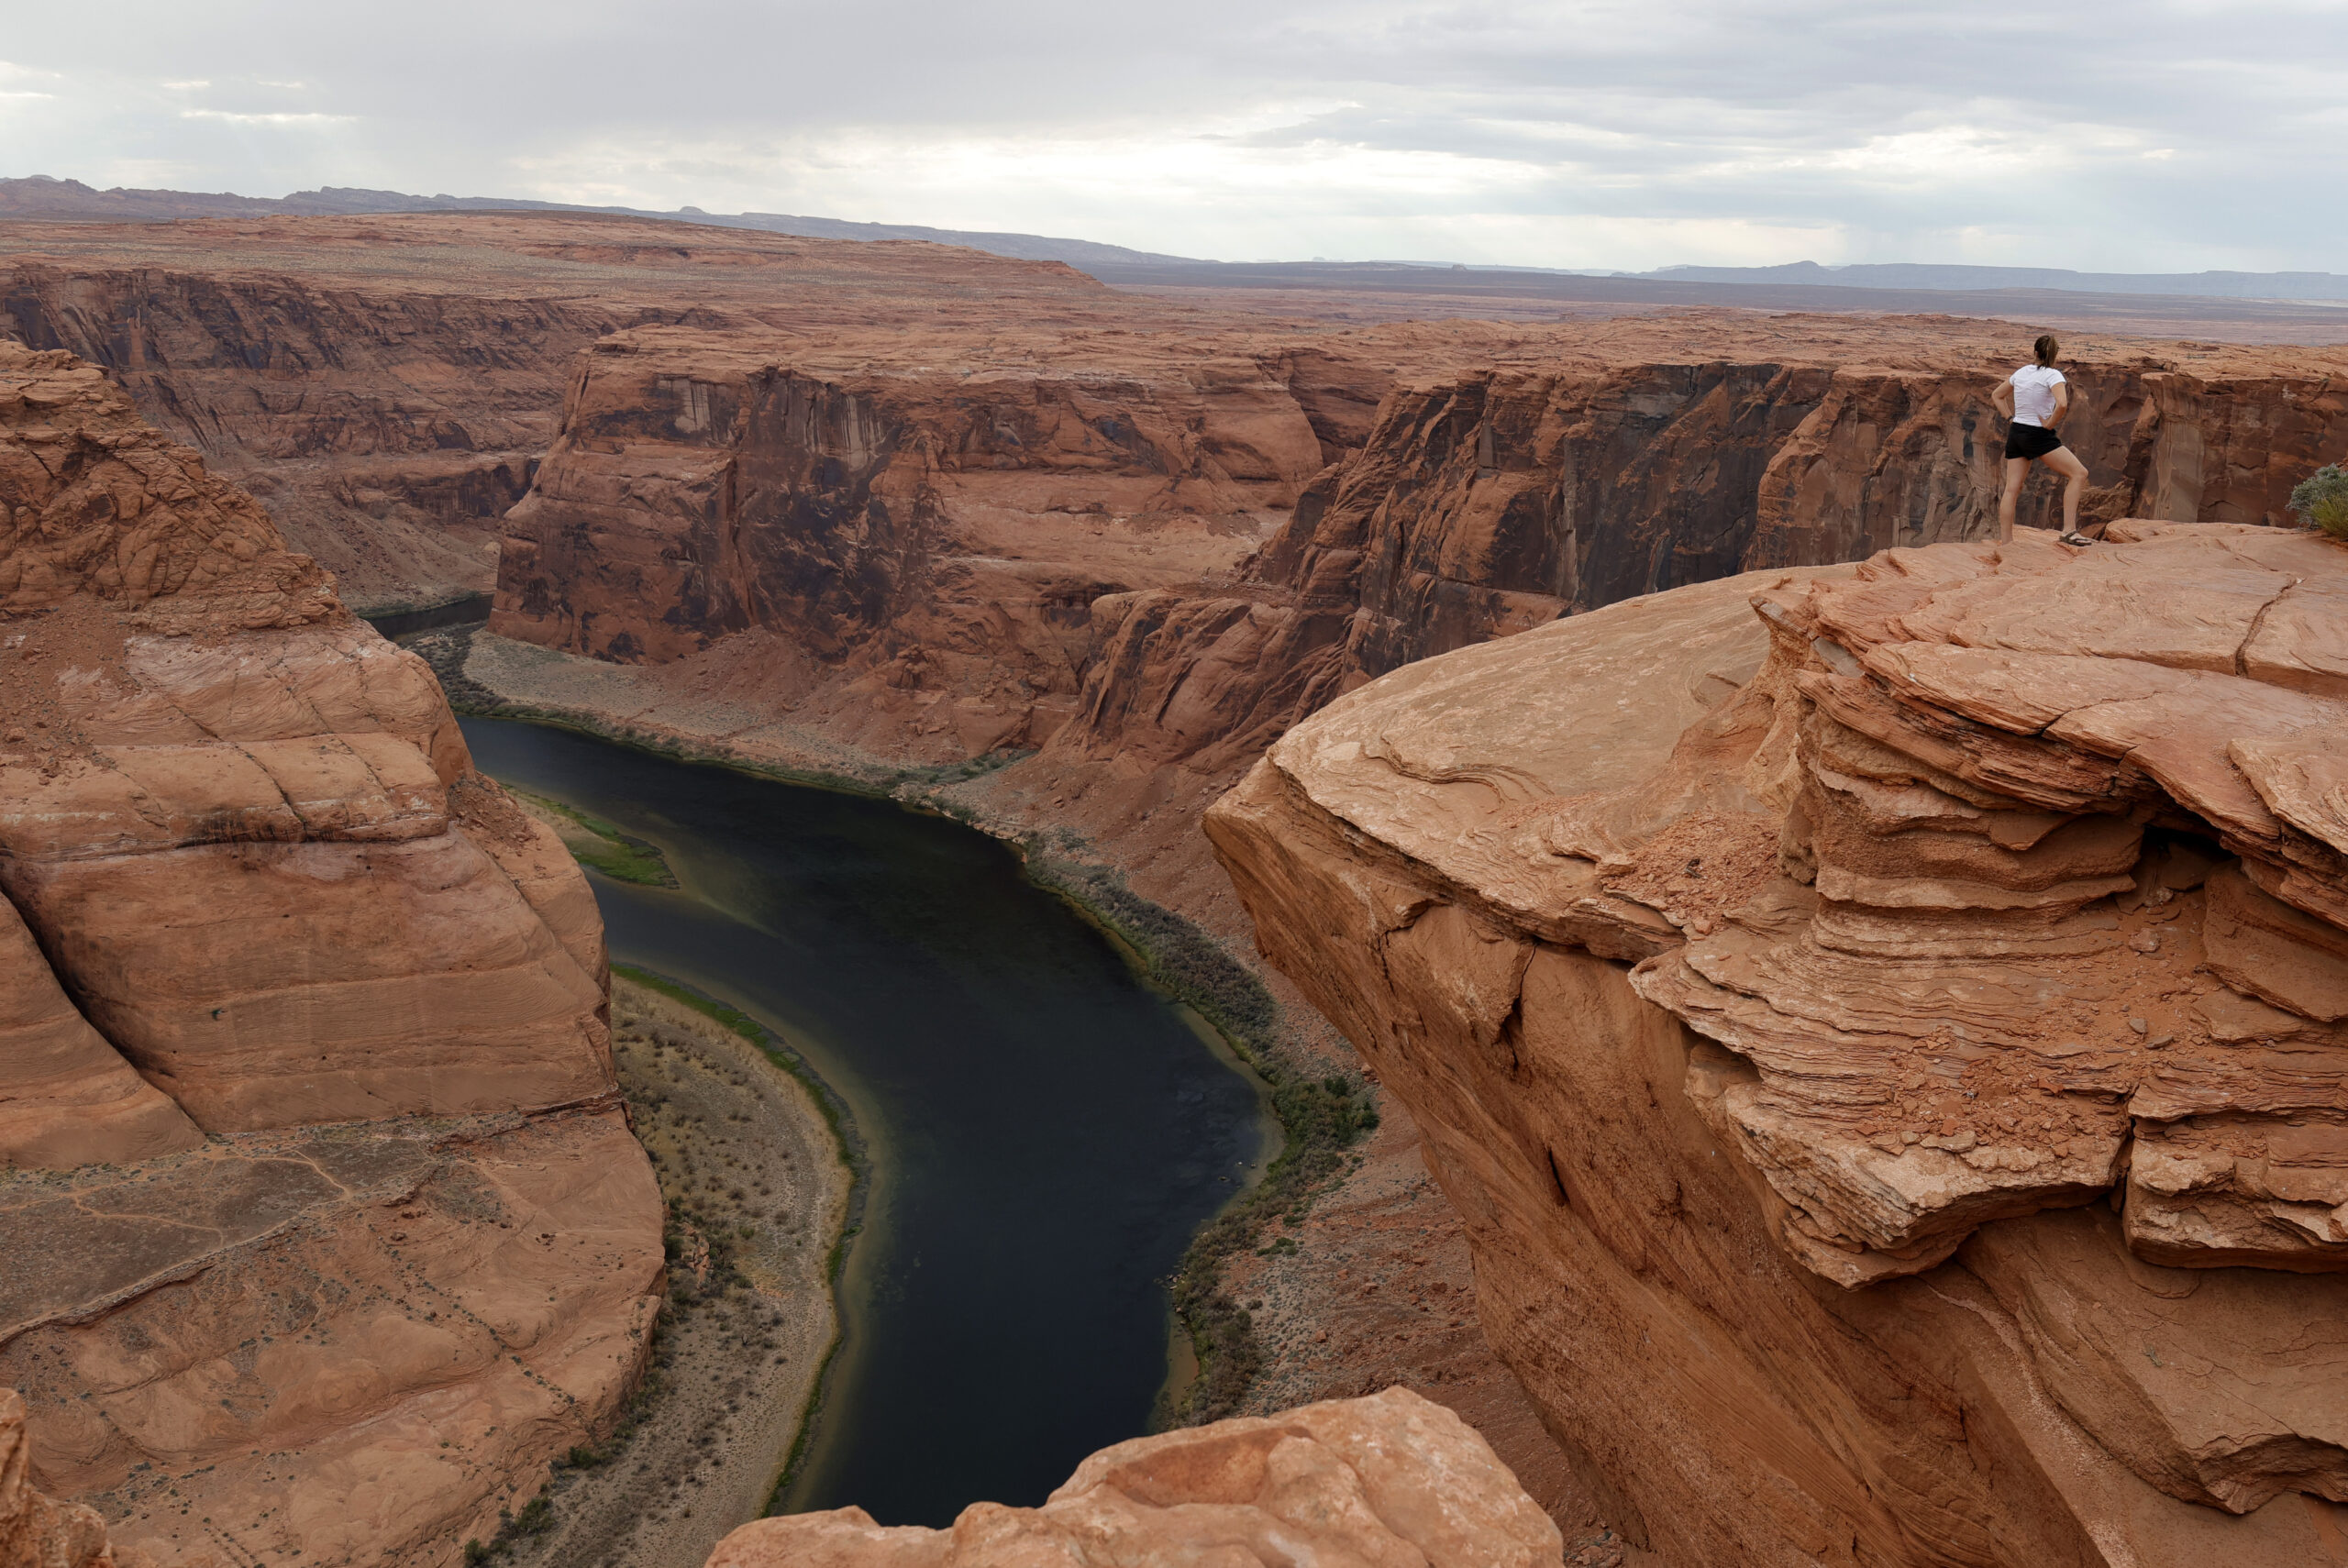 Climate change impact, Colorado River's alteration, States and tribes, Drought struggle, 2560x1710 HD Desktop